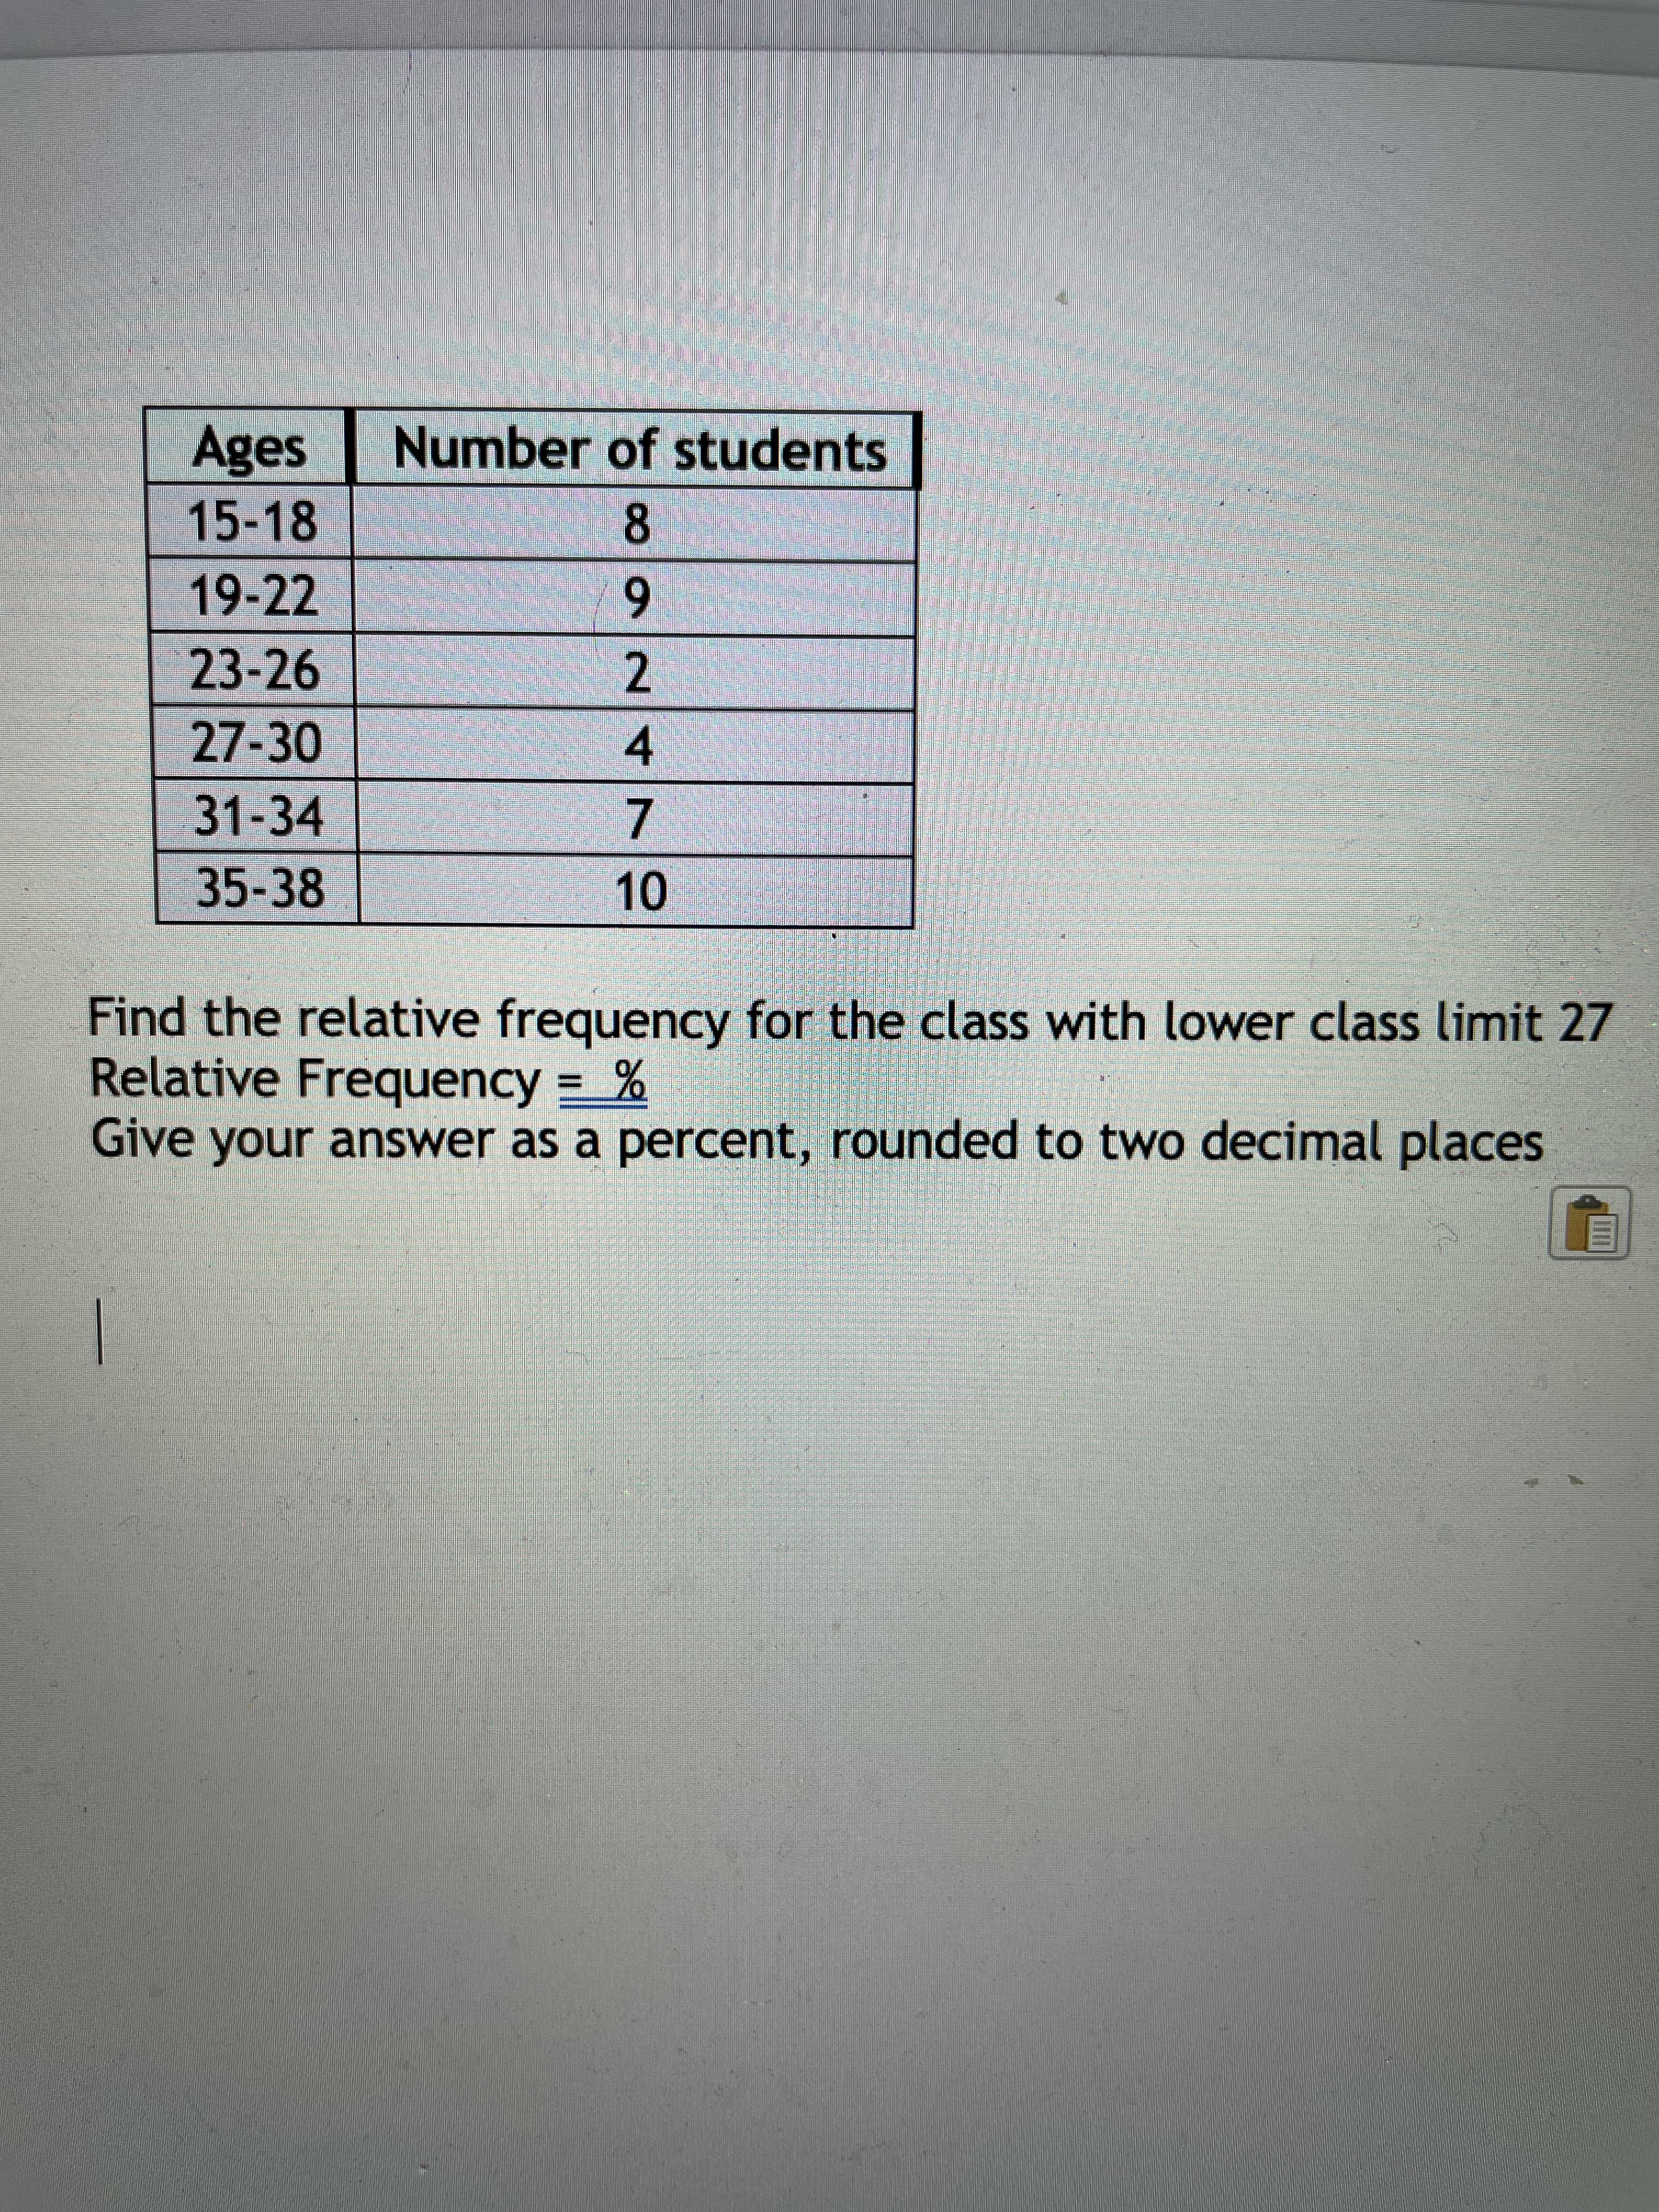 -
Ages
Number of students
15-18
6.
2
19-22
23-26
27-30
4.
31-34
7.
35-38
Find the relative frequency for the class with lower class limit 27
Relative Frequency = %
Give your answer as a percent, rounded to two decimal places
